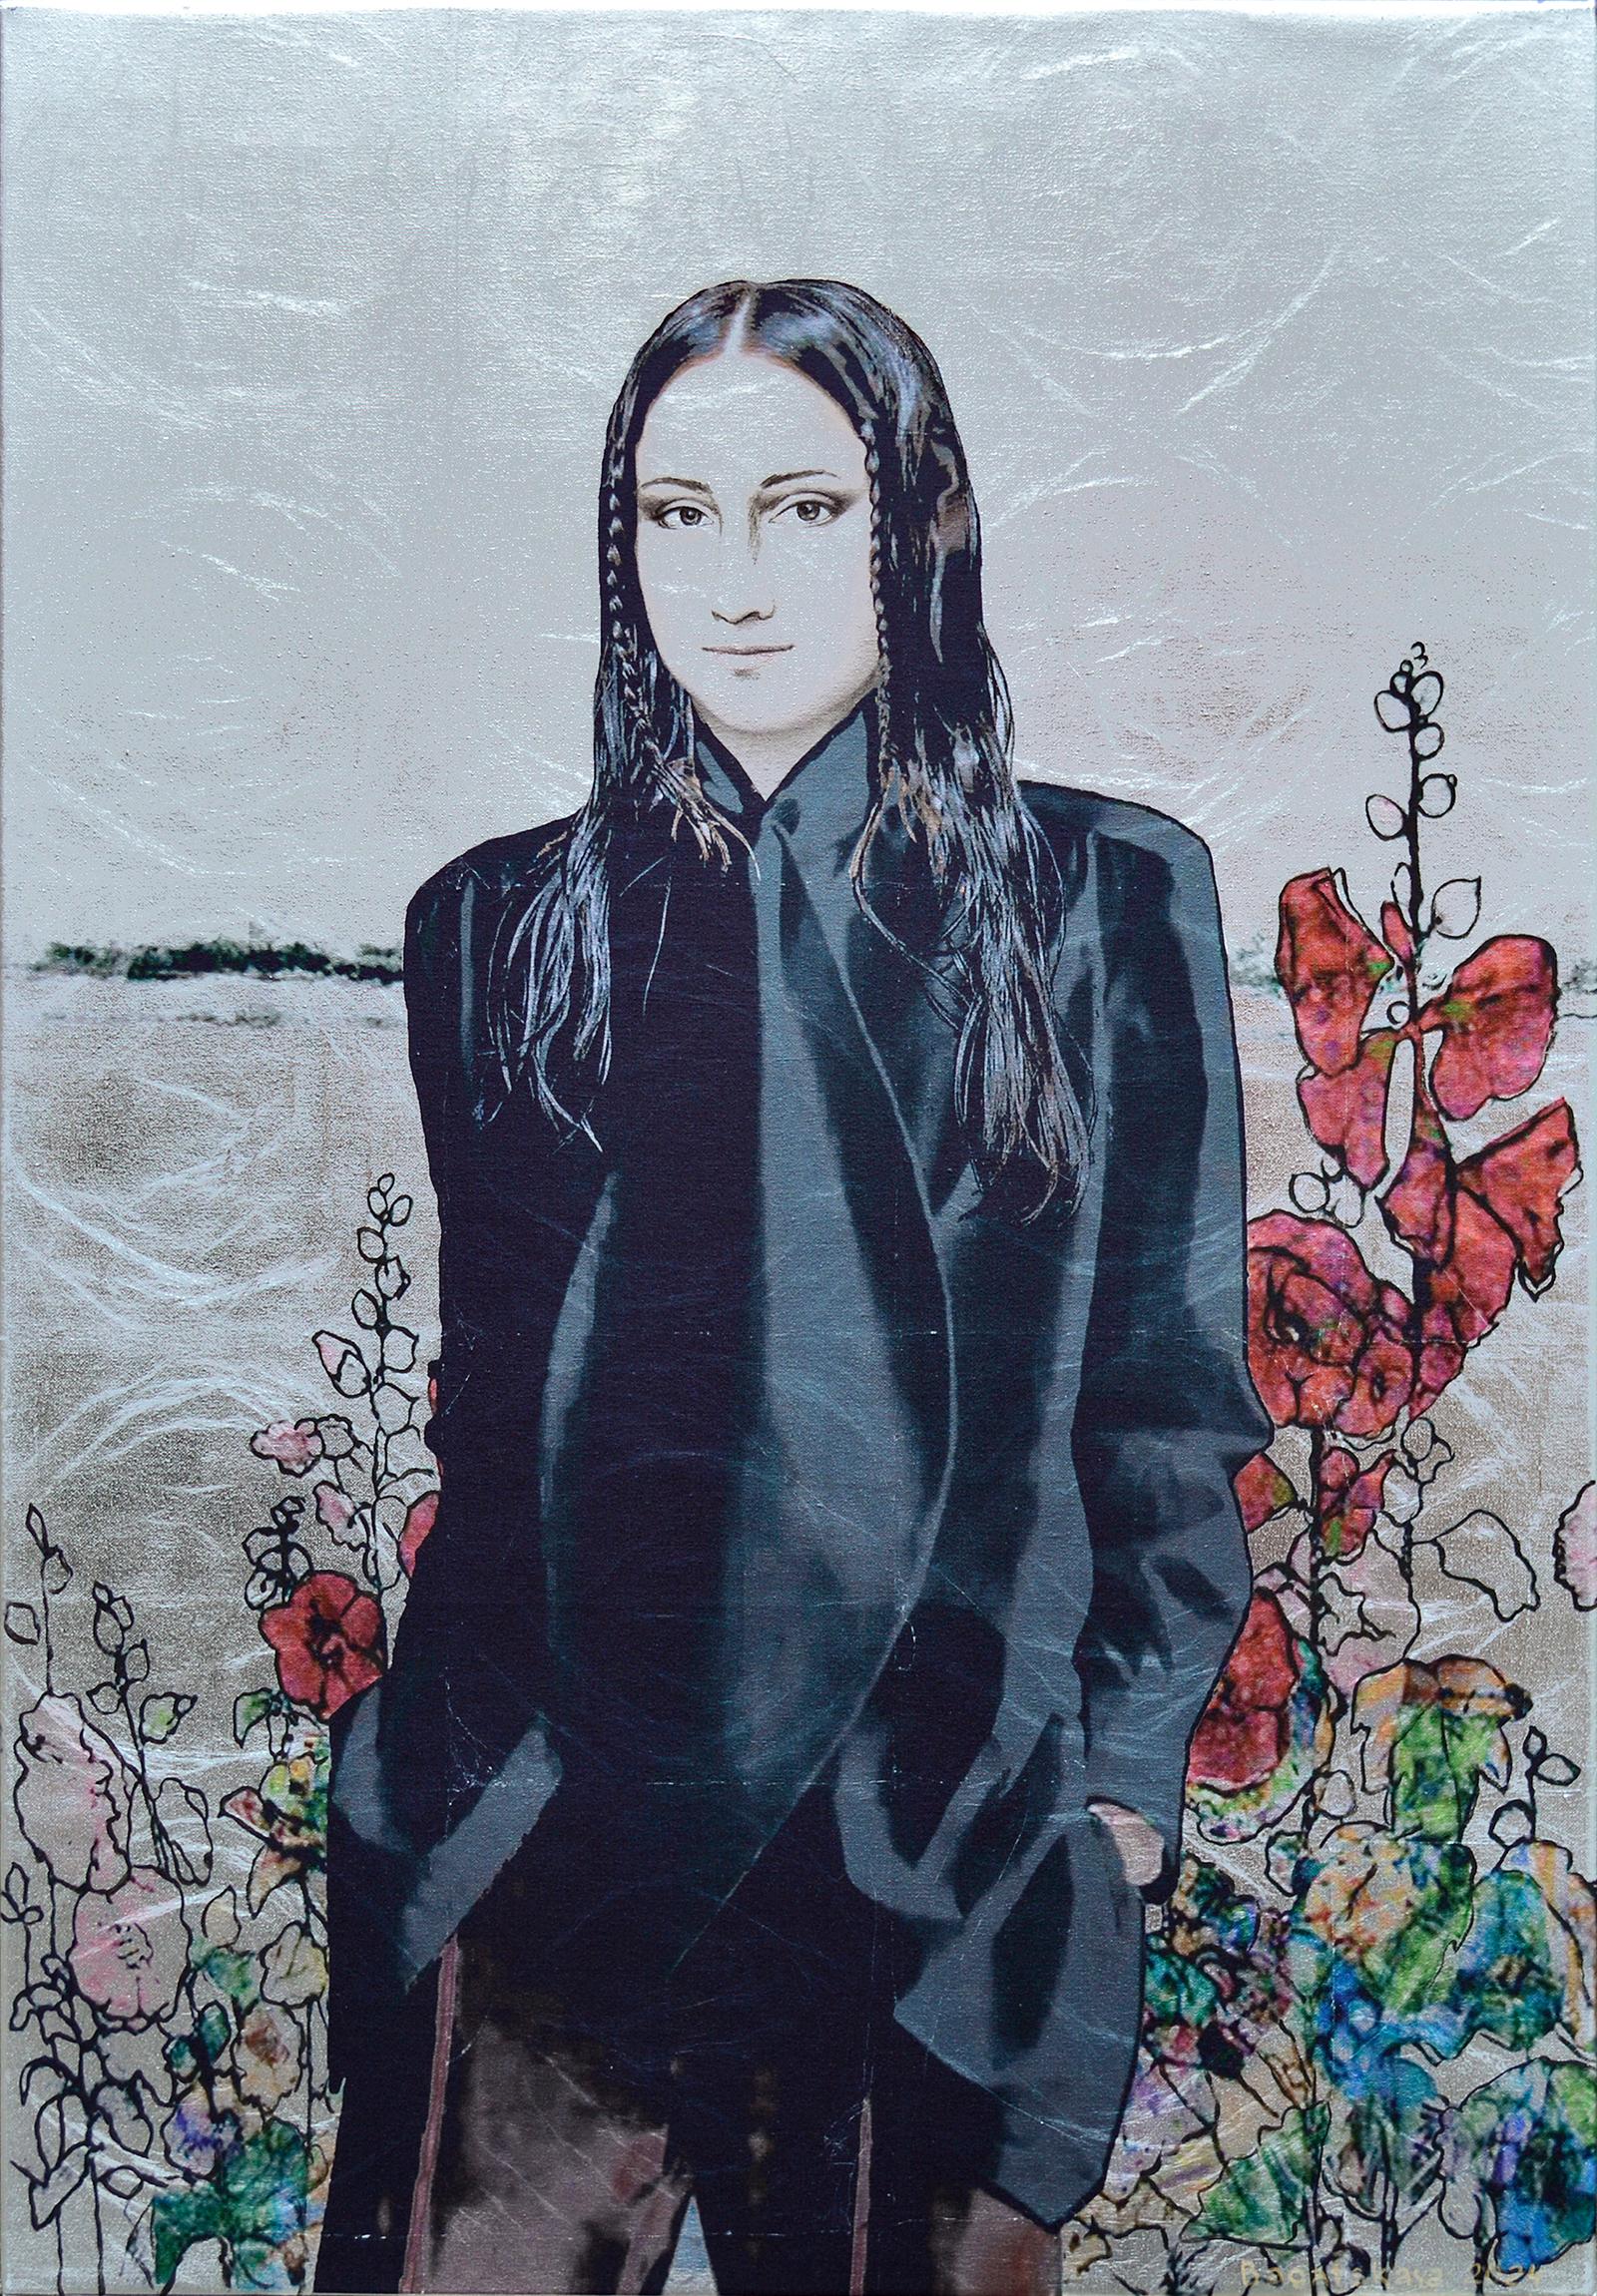 Contemporary printed portrait "In the FIeld among the Flowers"